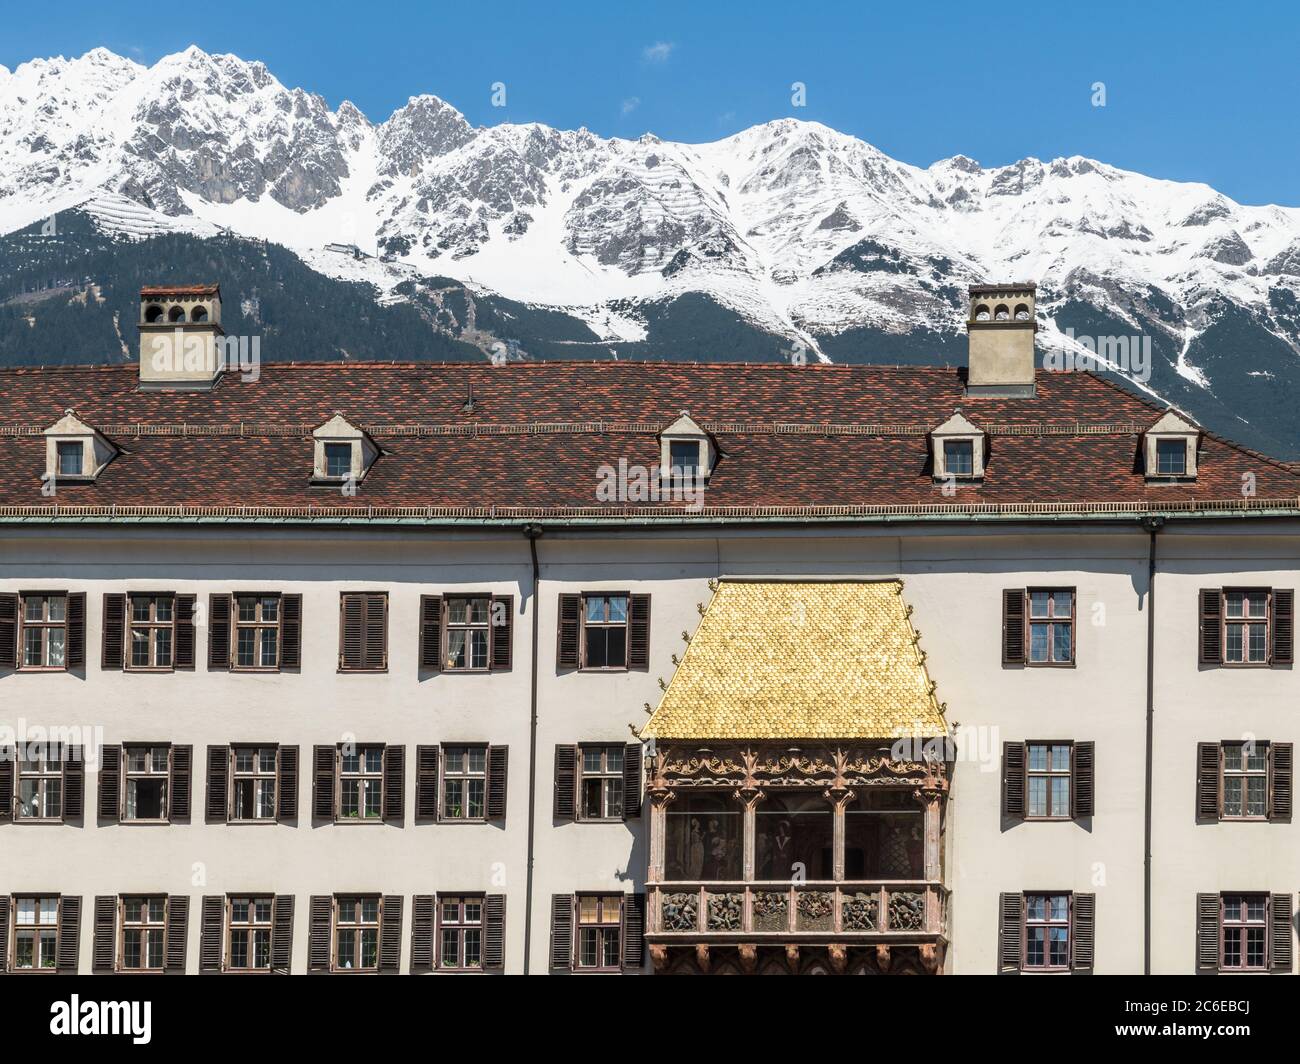 INNSBRUCK, AUSTRIA - MAY 5, 2016: The  iconic copper tiled Golden Roof in the Old Town of Innsbruck, Austria. The snowcapped mountain tops of the Alps Stock Photo